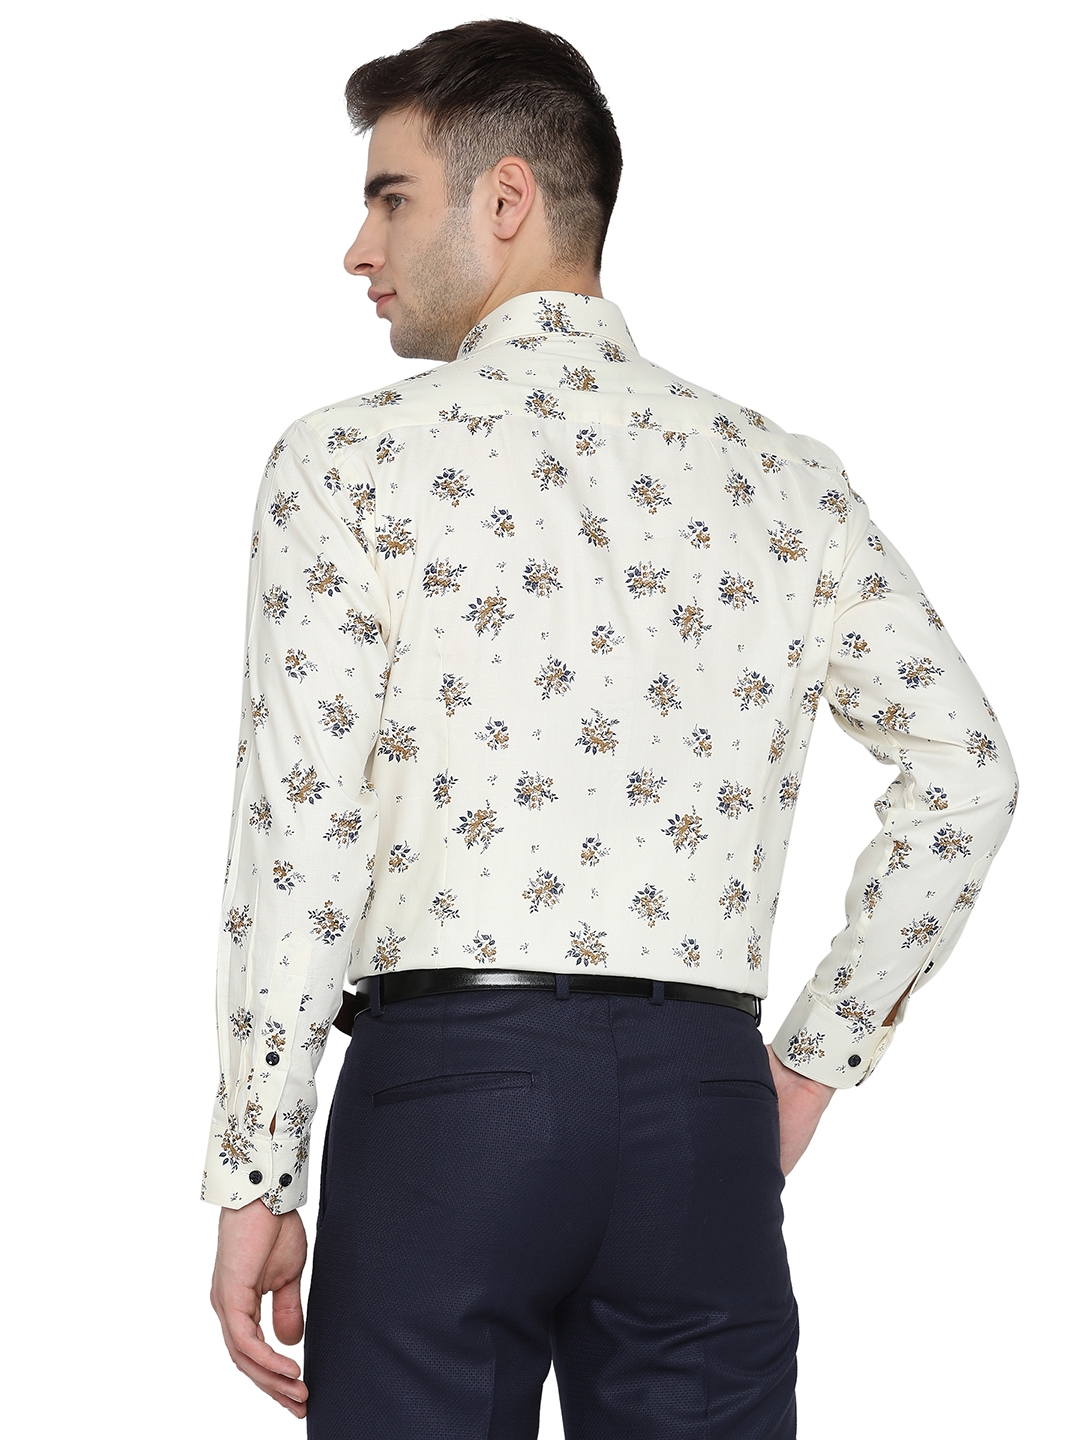 Greenfibre | Cream Printed Slim Fit Party Wear Shirt | Greenfibre 2